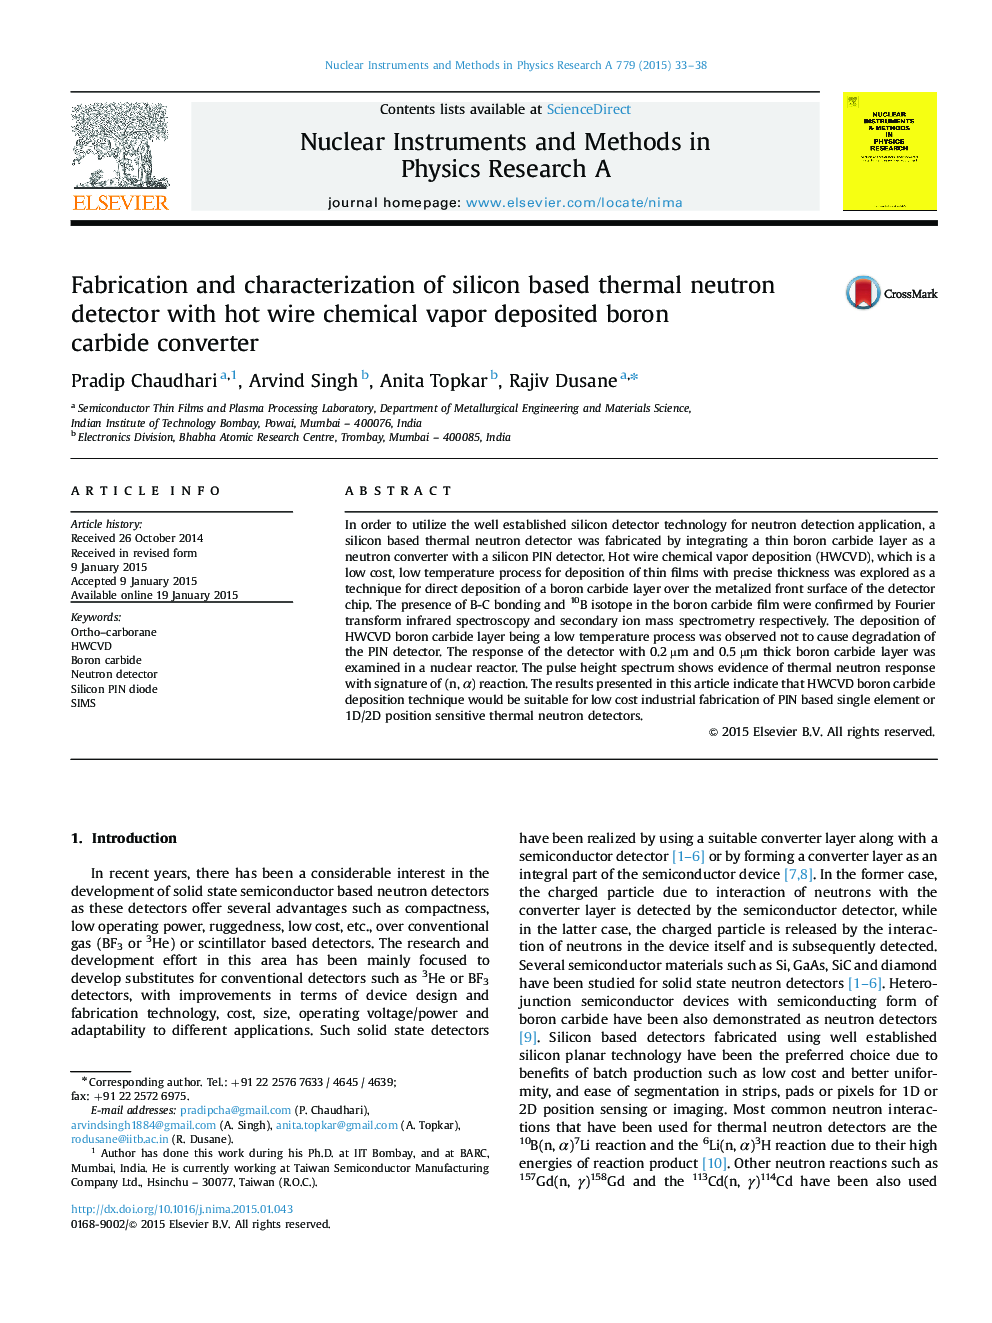 Fabrication and characterization of silicon based thermal neutron detector with hot wire chemical vapor deposited boron carbide converter